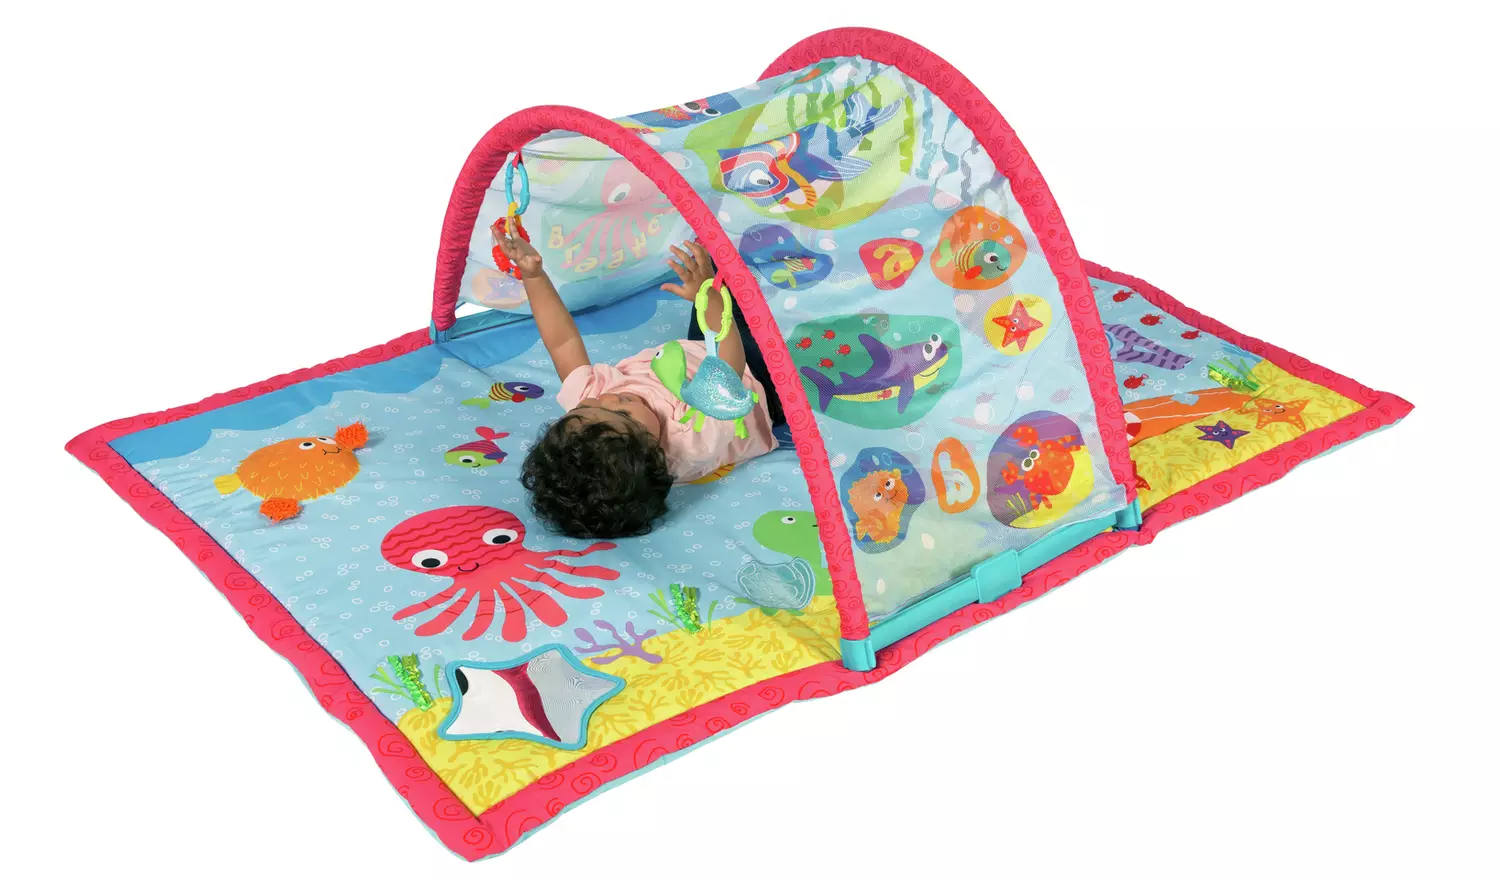 Chad Valley Ocean Deluxe Baby Gym